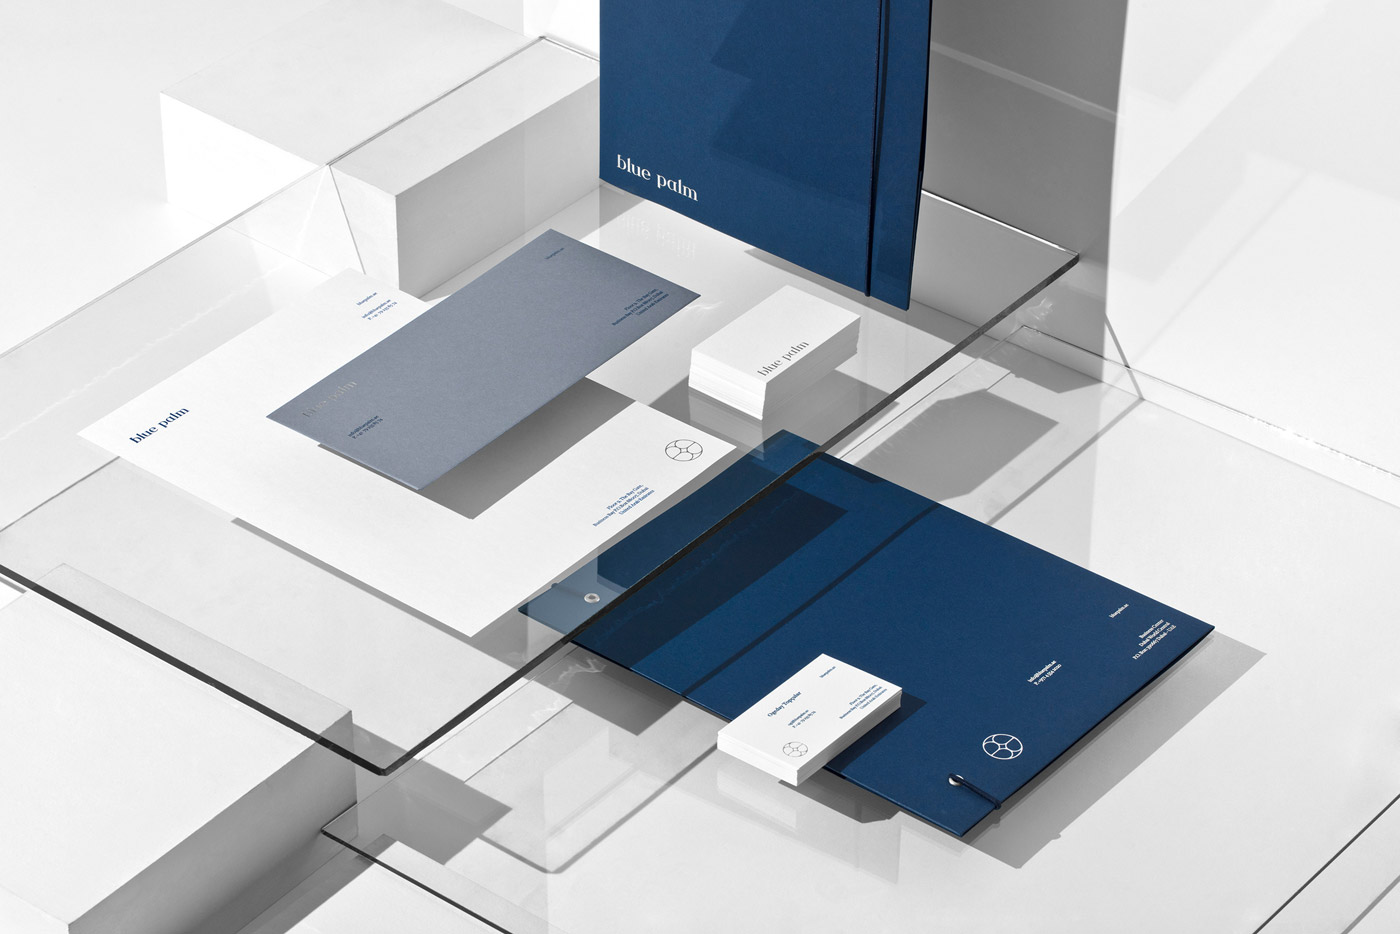 Graphic design and branding by Sabbath Studio for financial company Blue Palm.